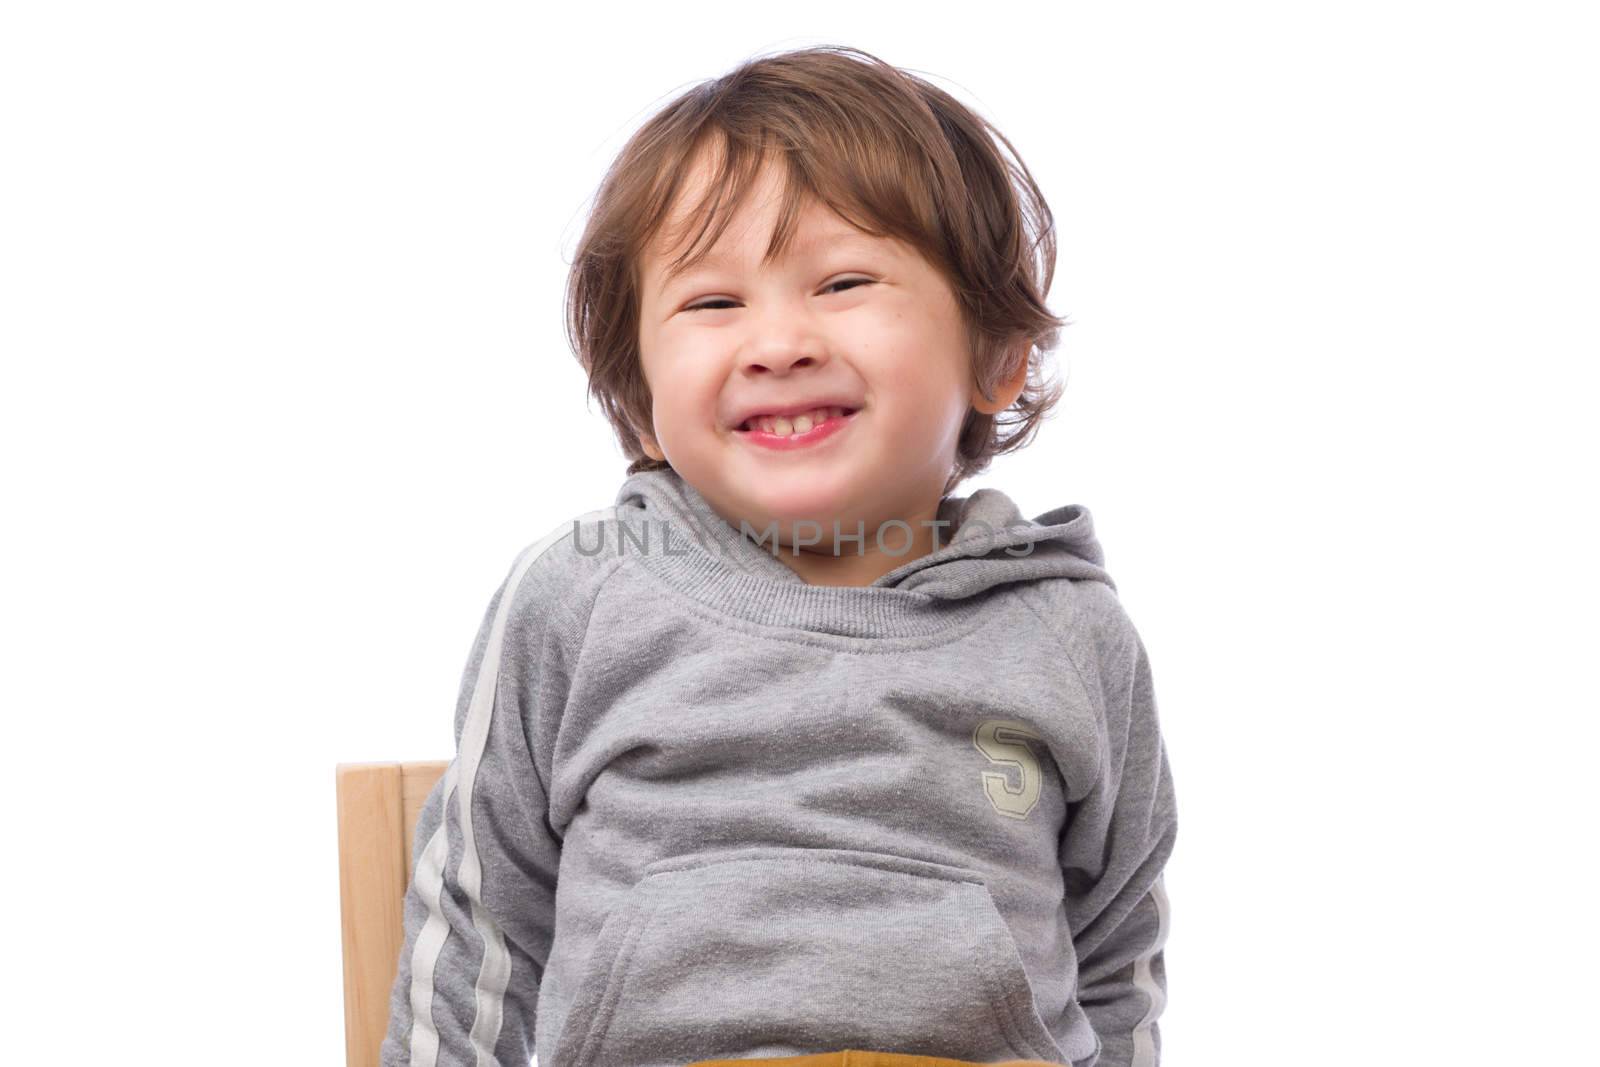 A cute 3 year old boy with a happy expression on a white background.